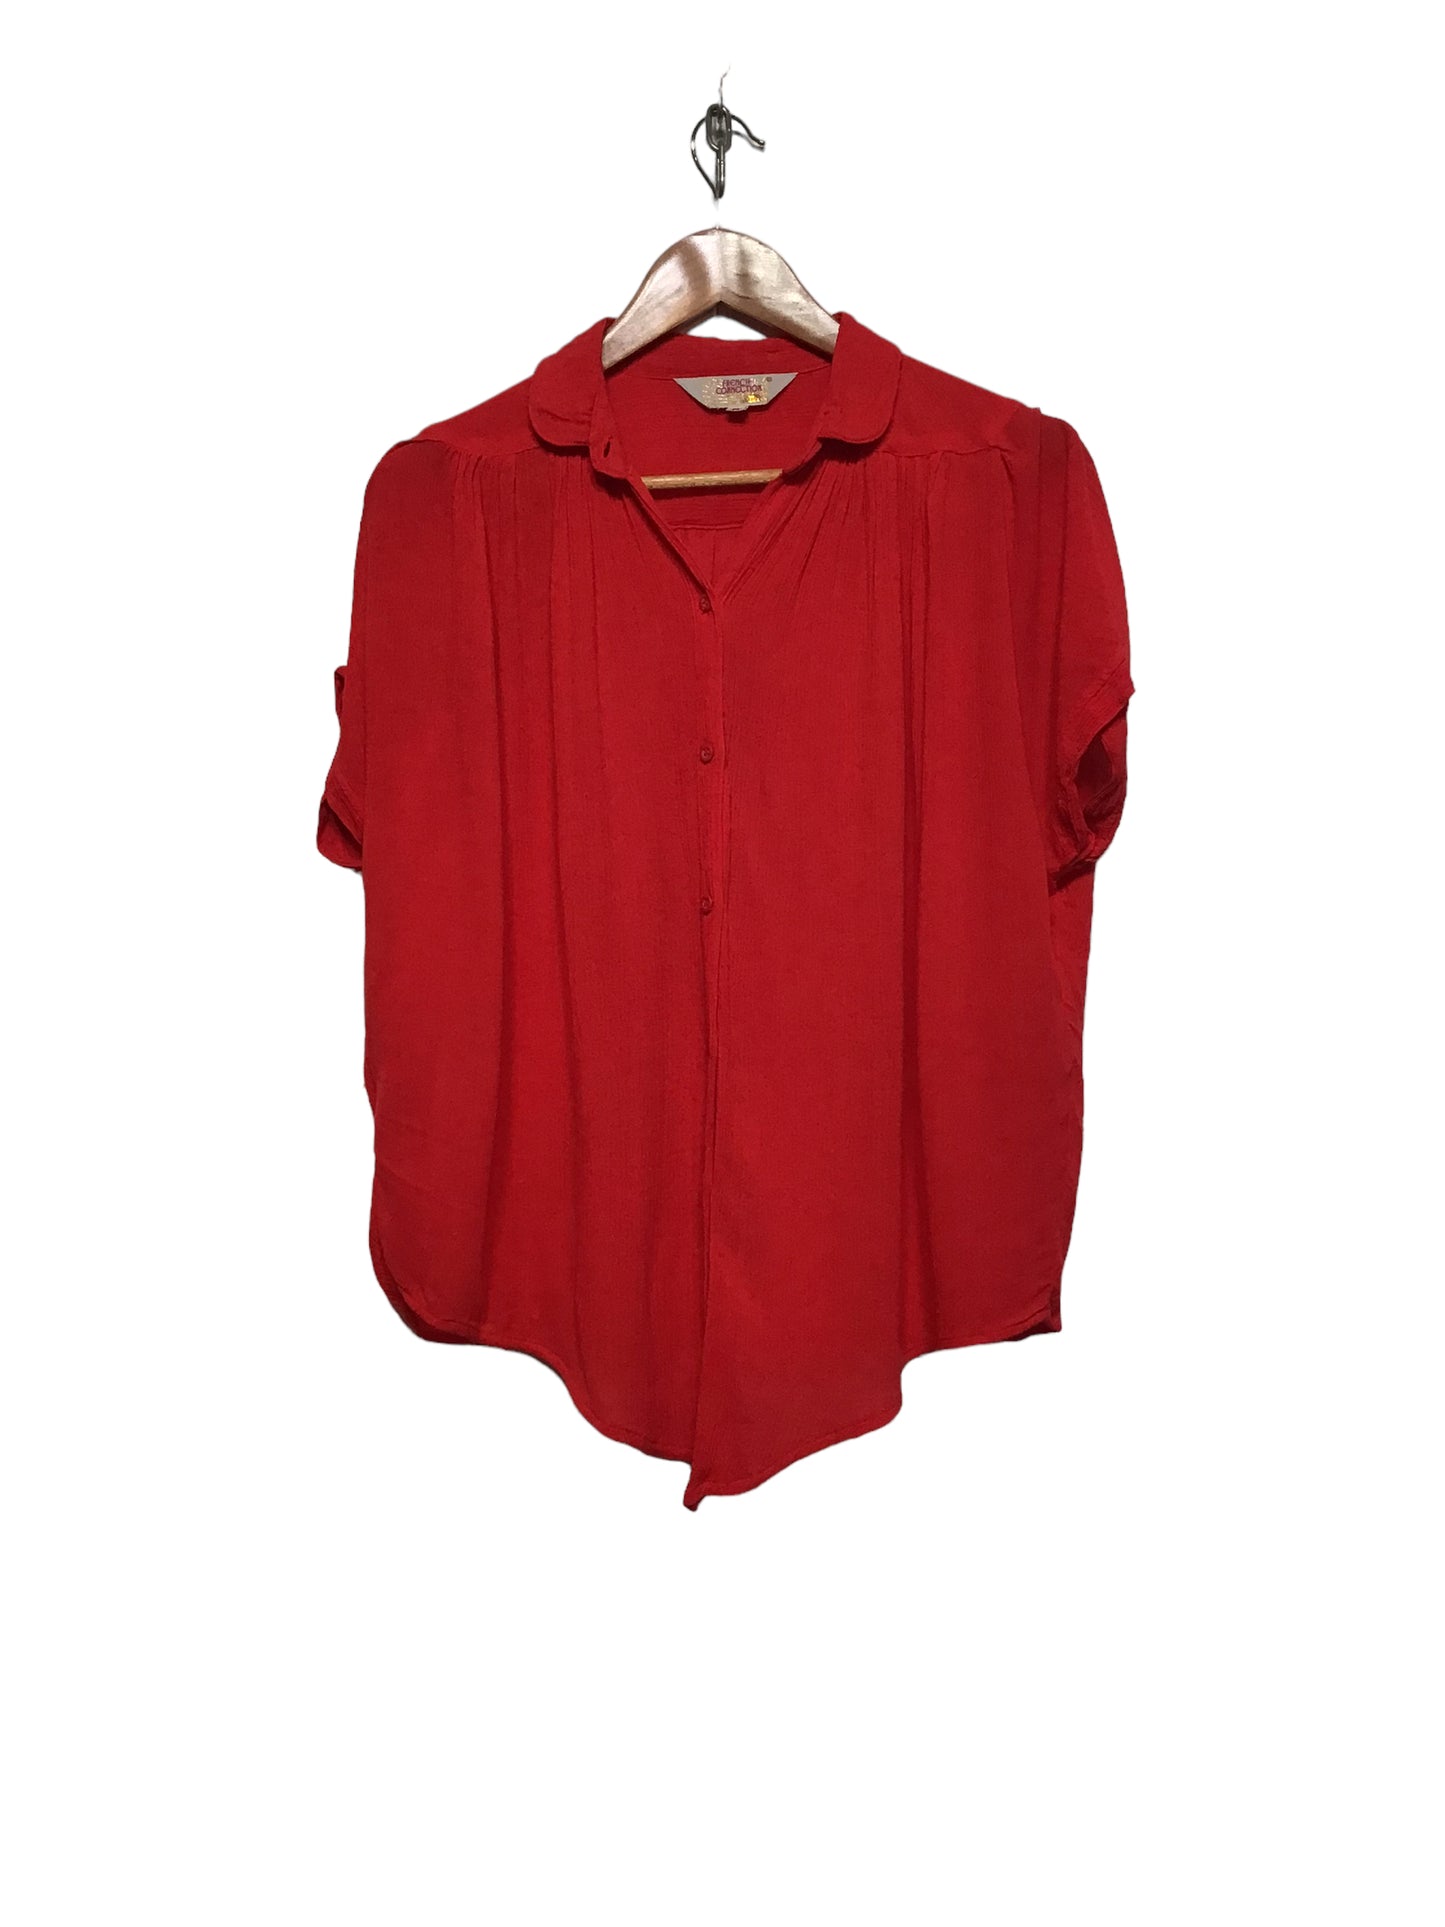 French Connection Red Blouse (Size M)